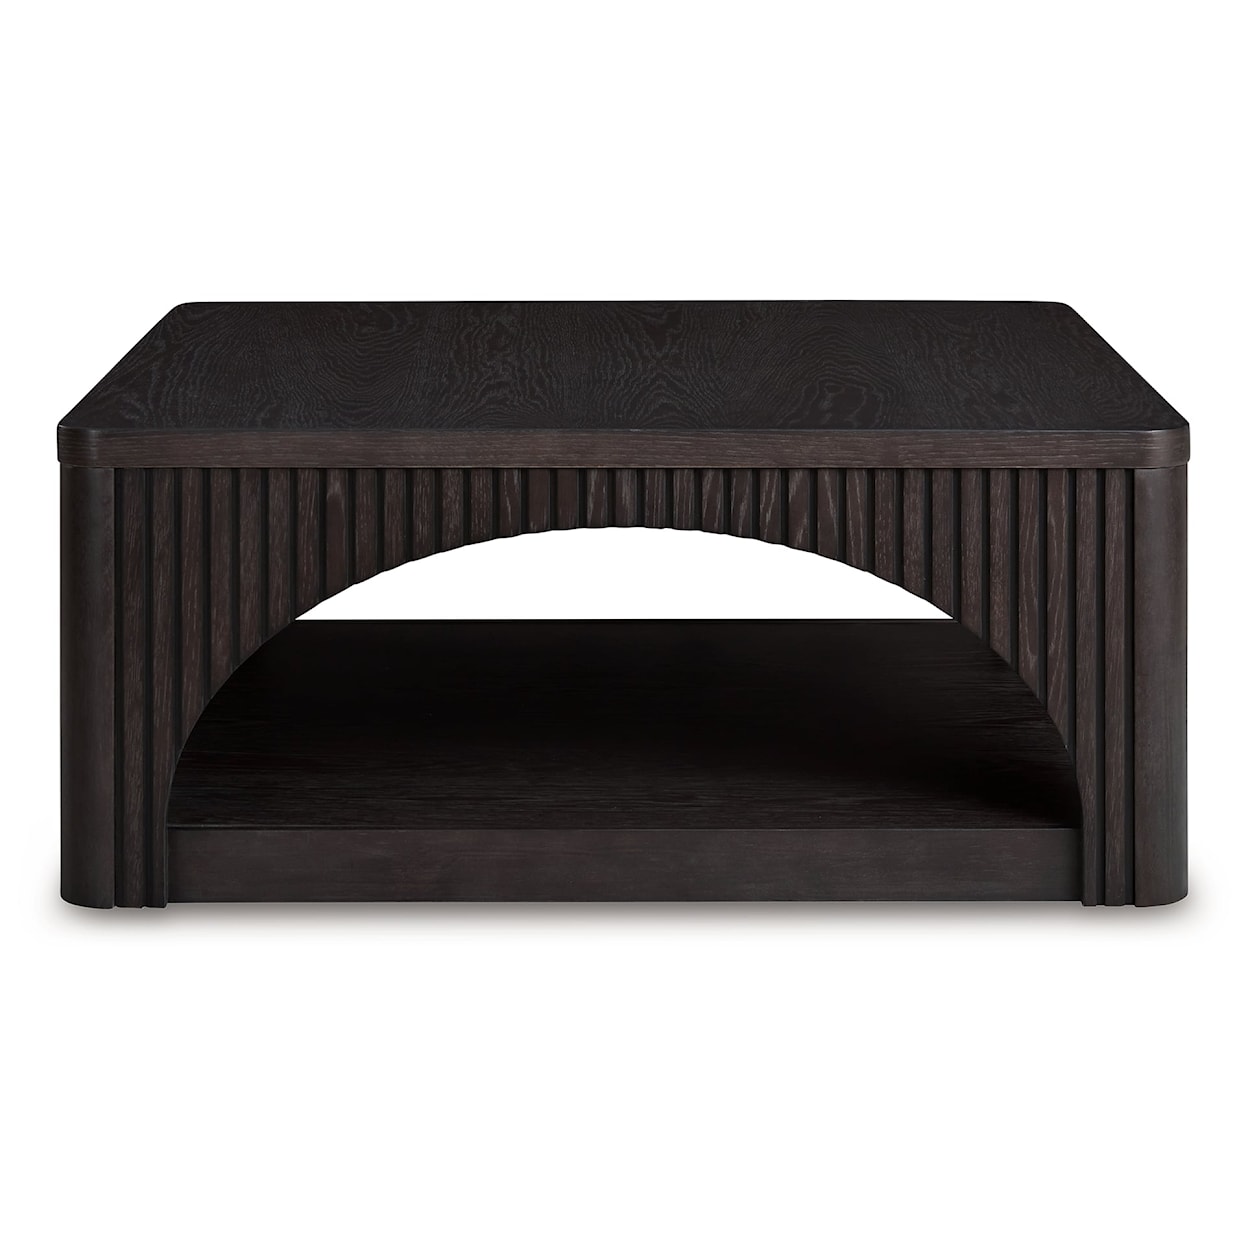 StyleLine Yellink Square Coffee Table